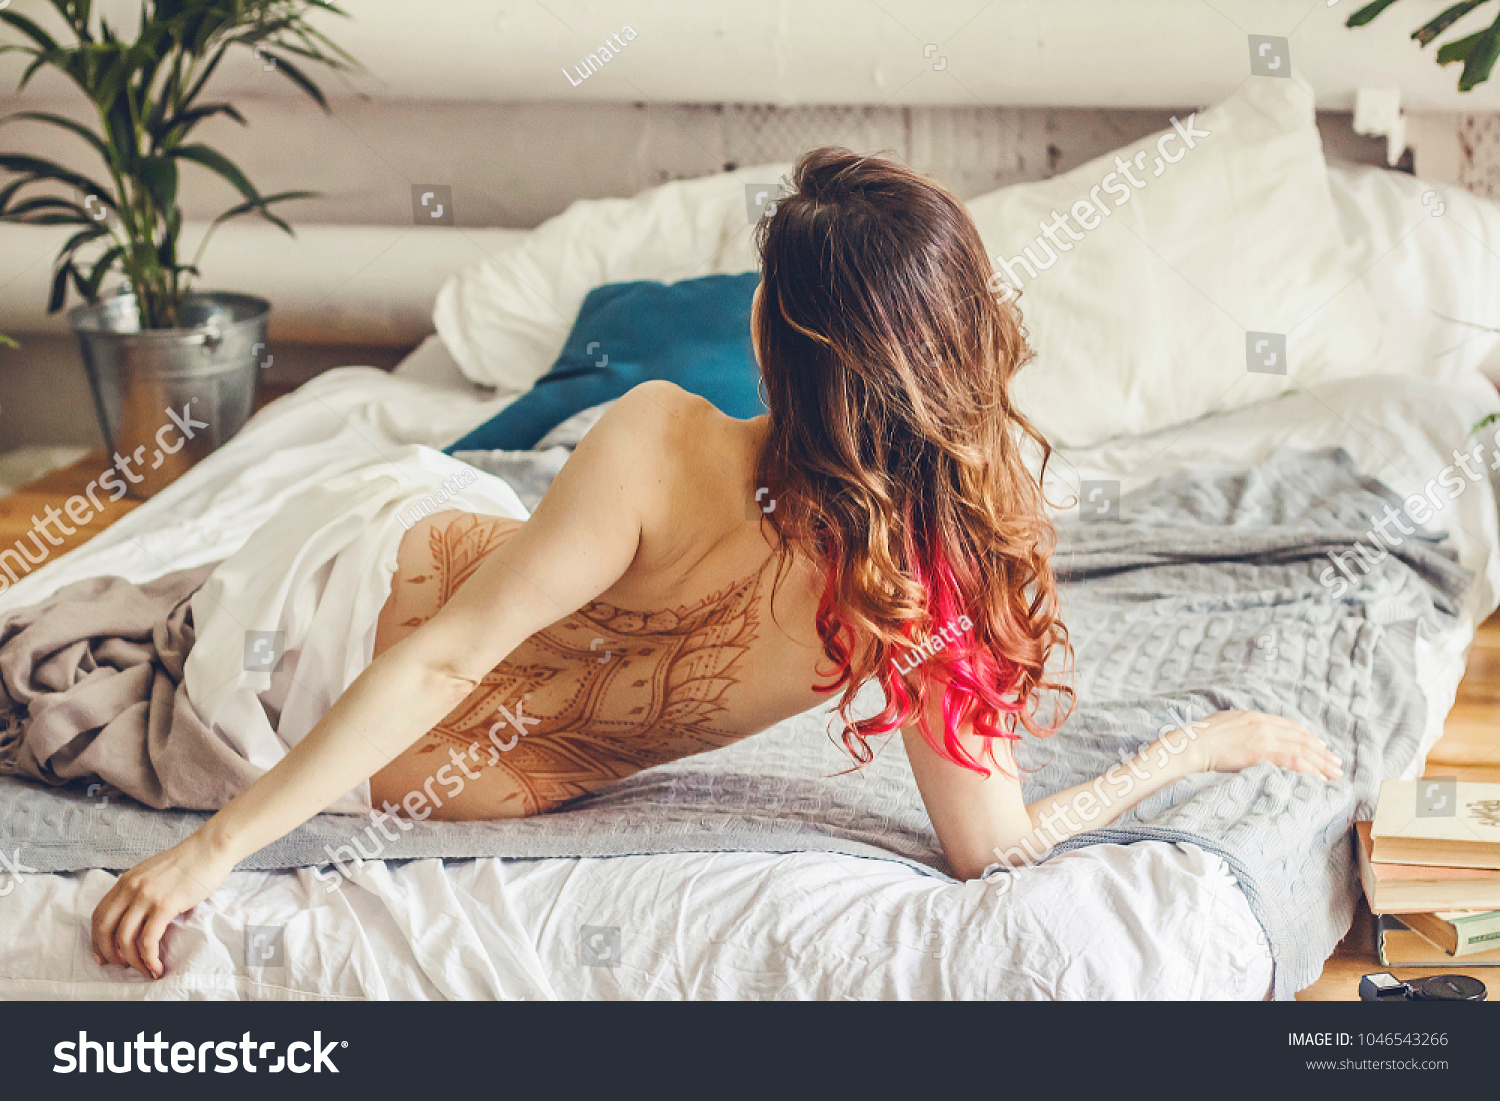 Nude Young Woman Sleeping On Bed Stock